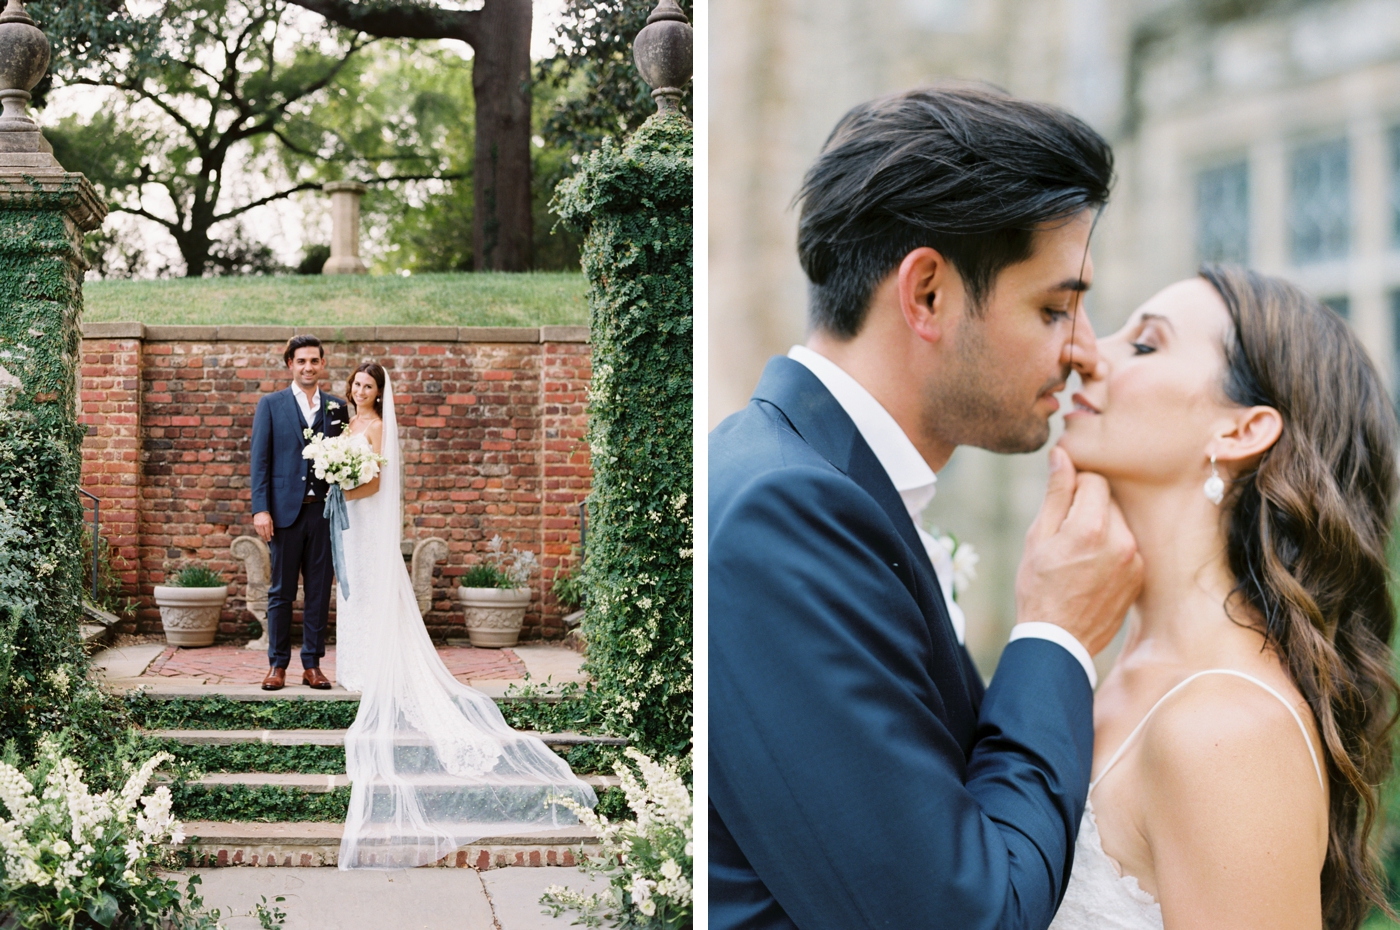 Elopement ceremony at The Virginia House